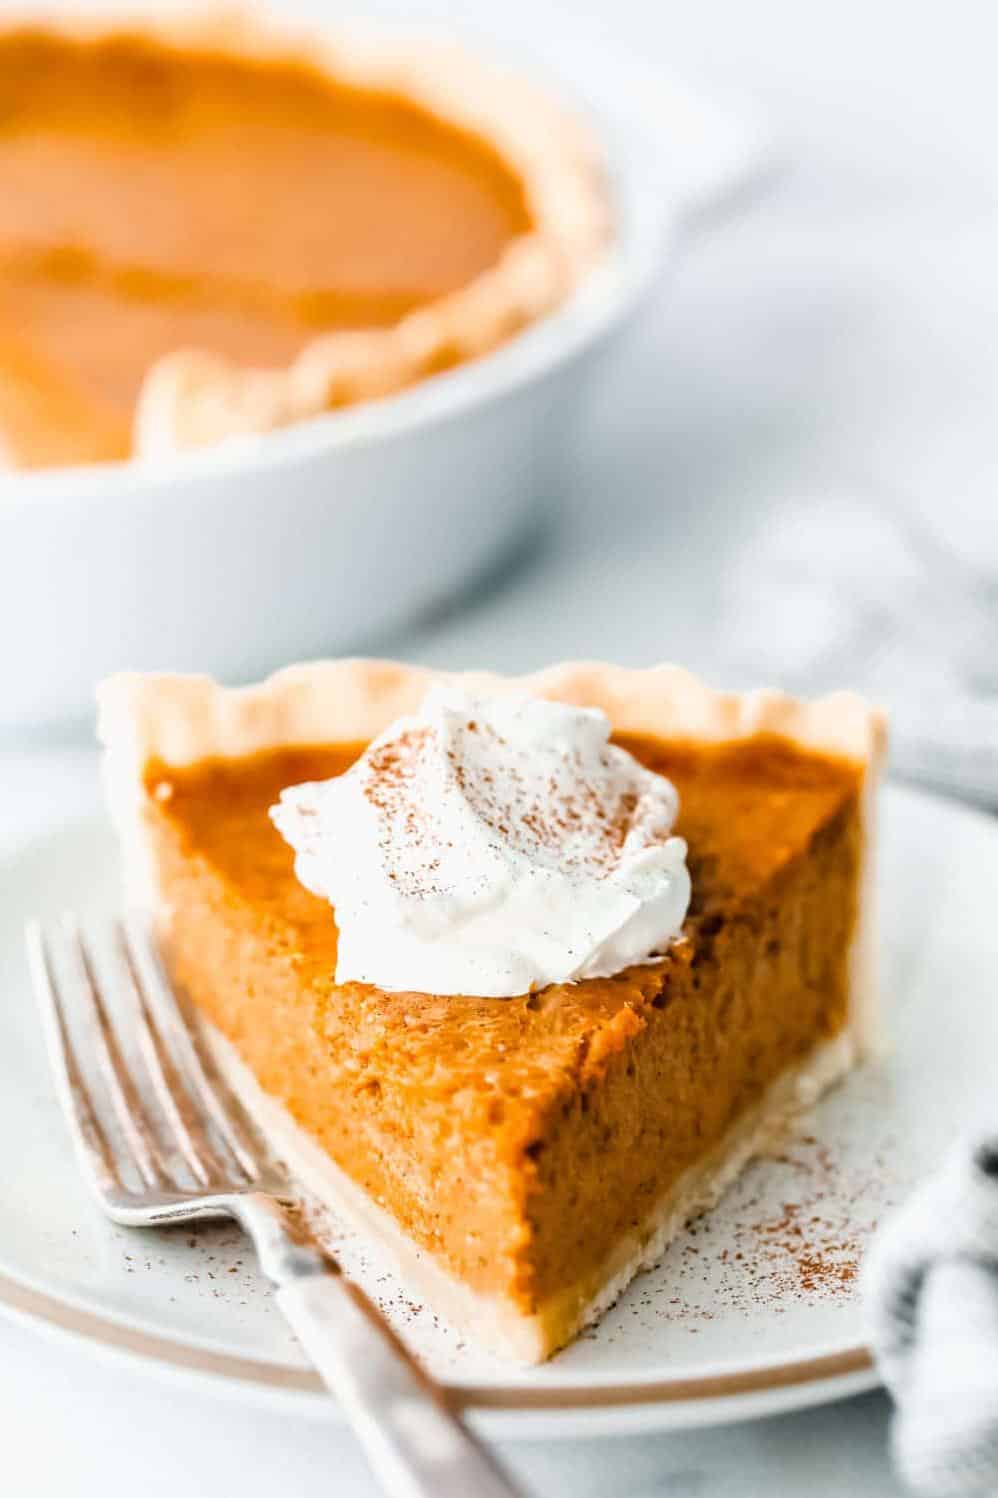  Get ready to fall in love with this pumpkin pie!